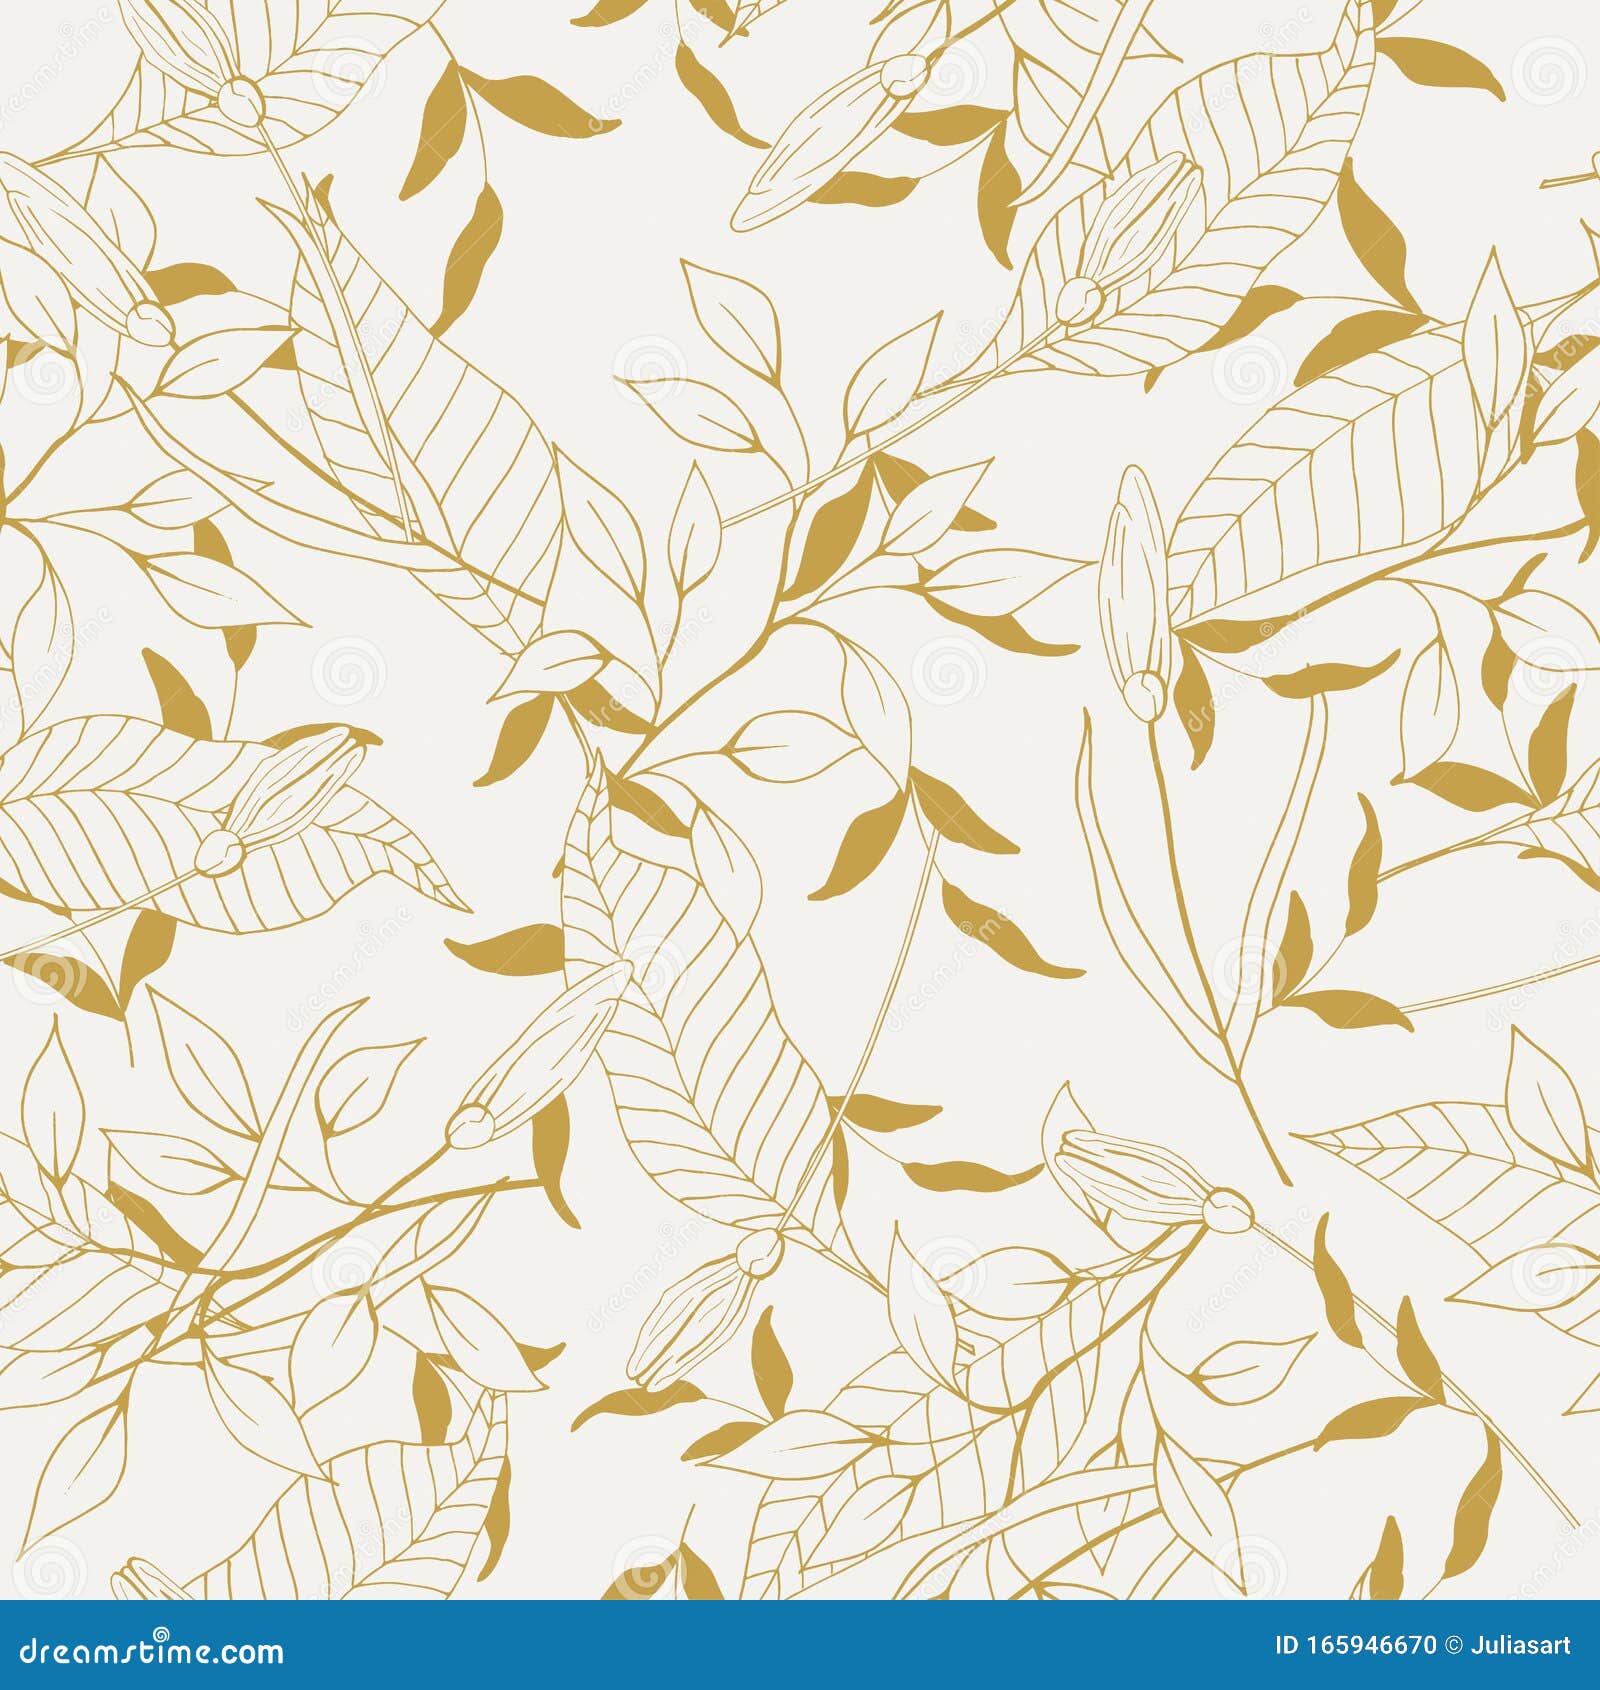 Gold Botany Pattern Vector Illustration of Painted Small Floral ...